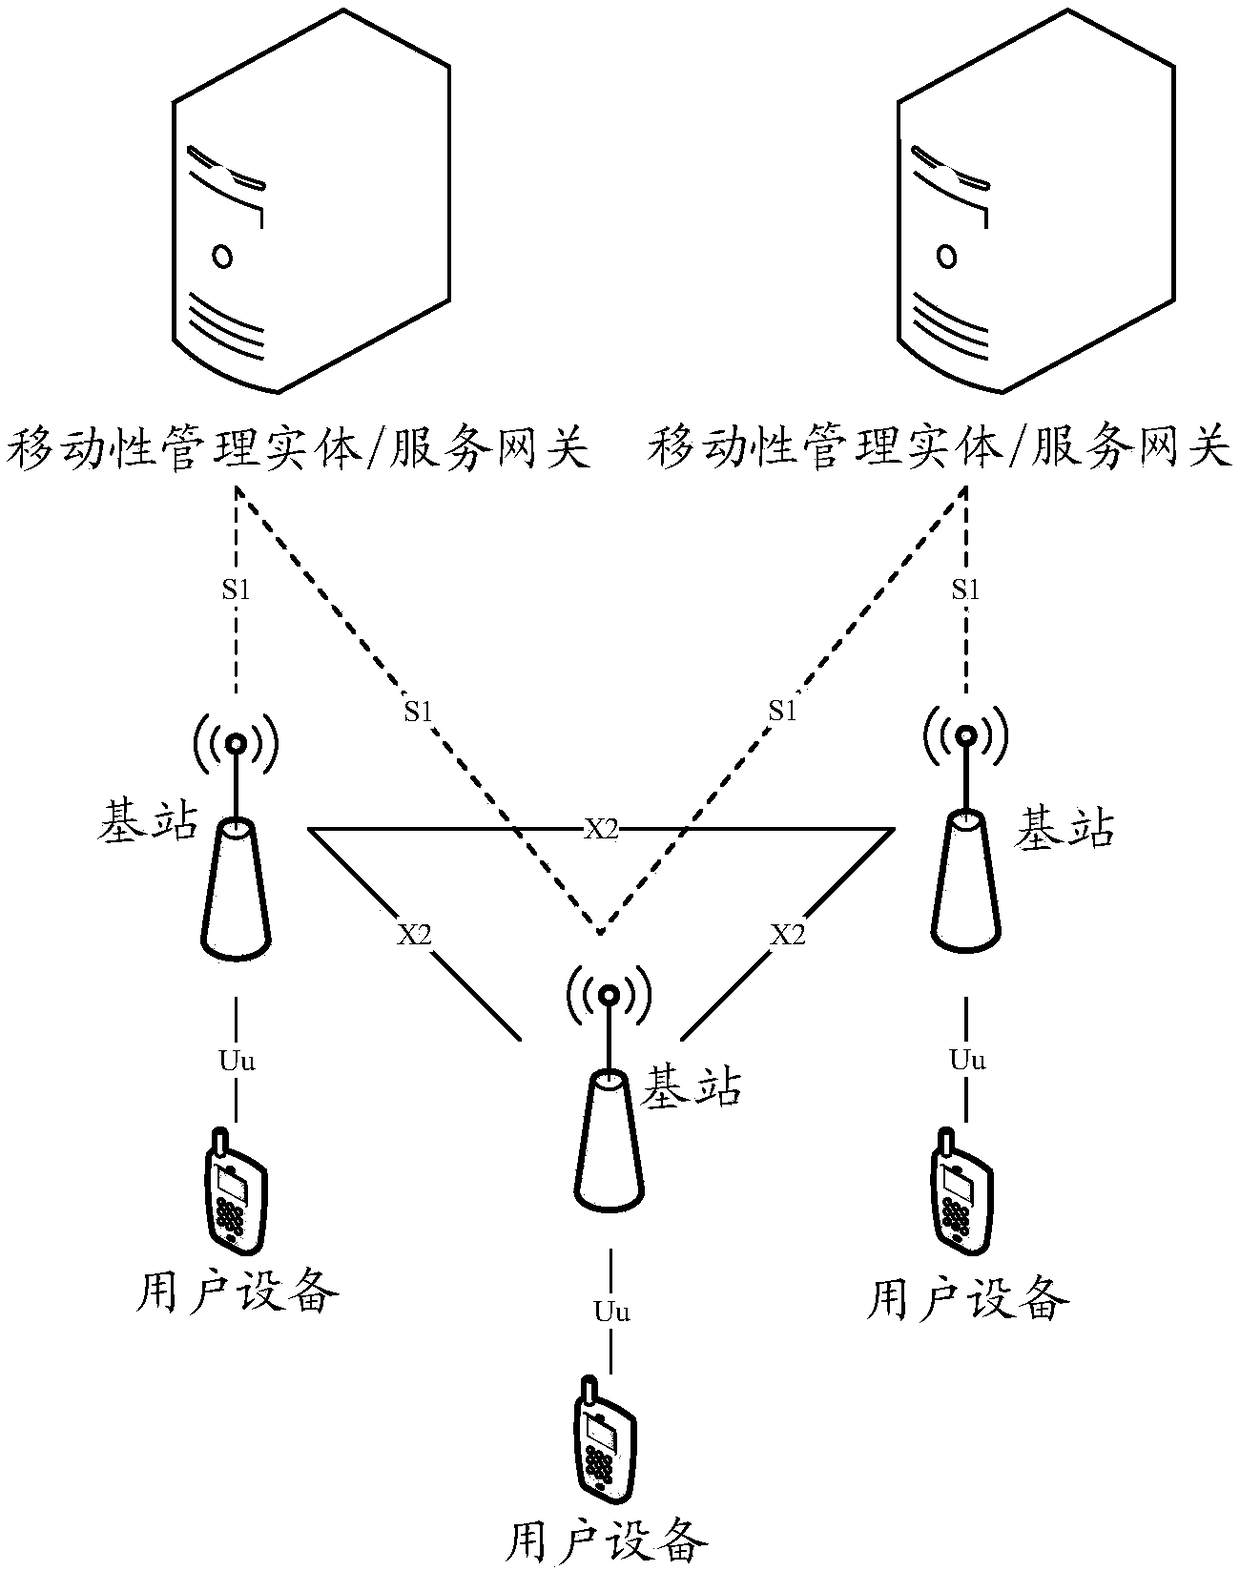 Reference signal notification method and device